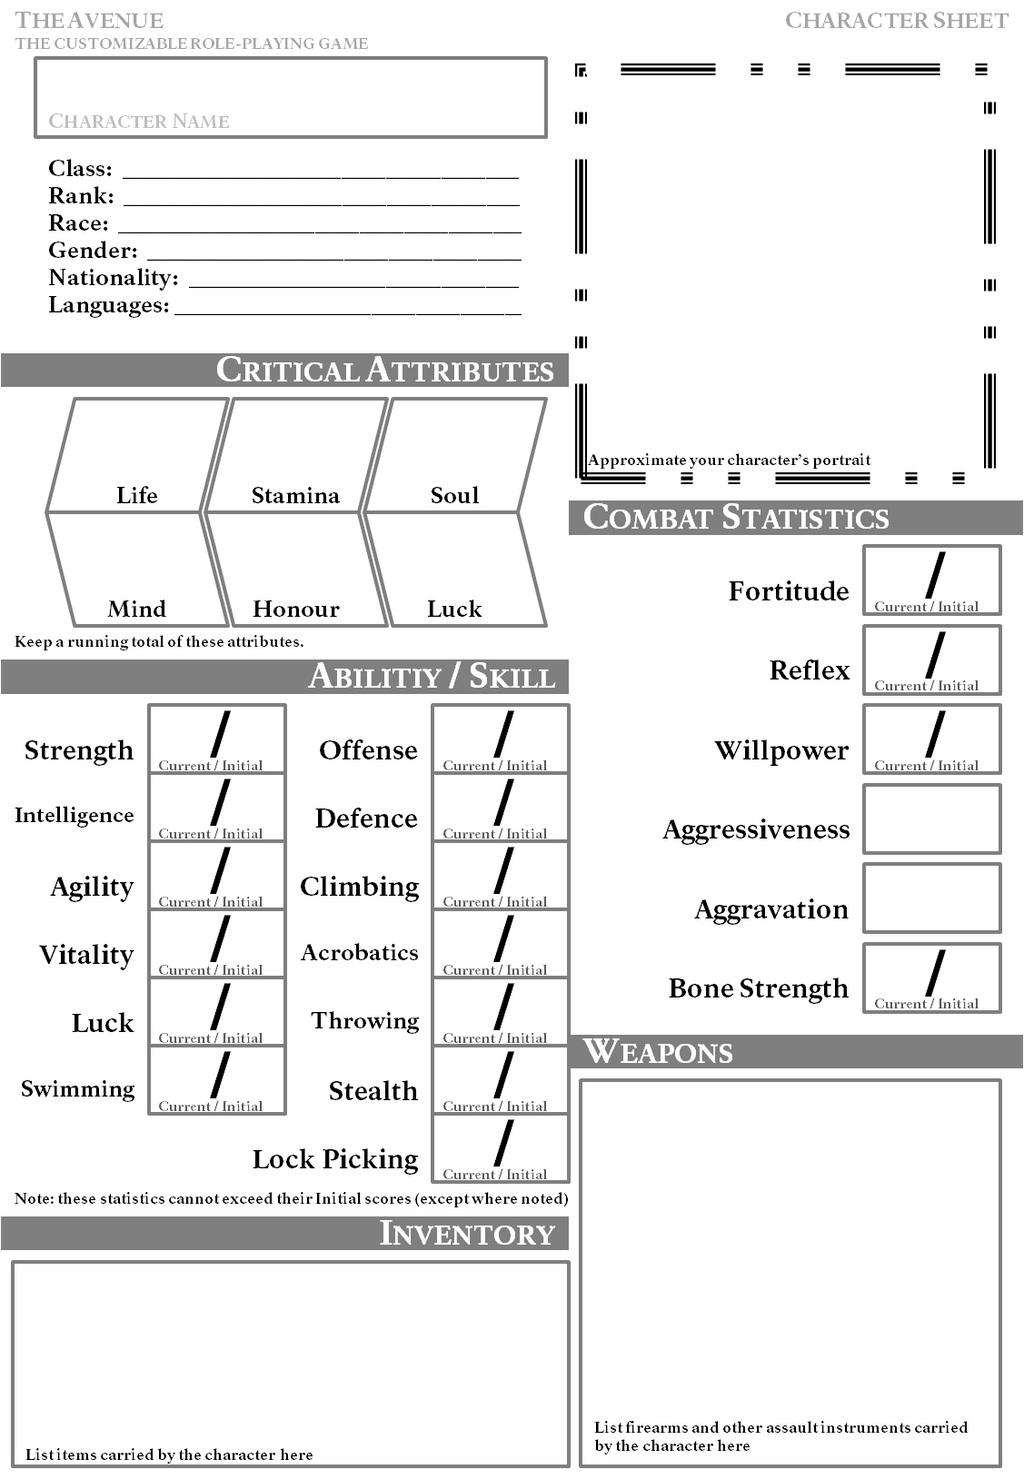 roleplay-character-sheet-template